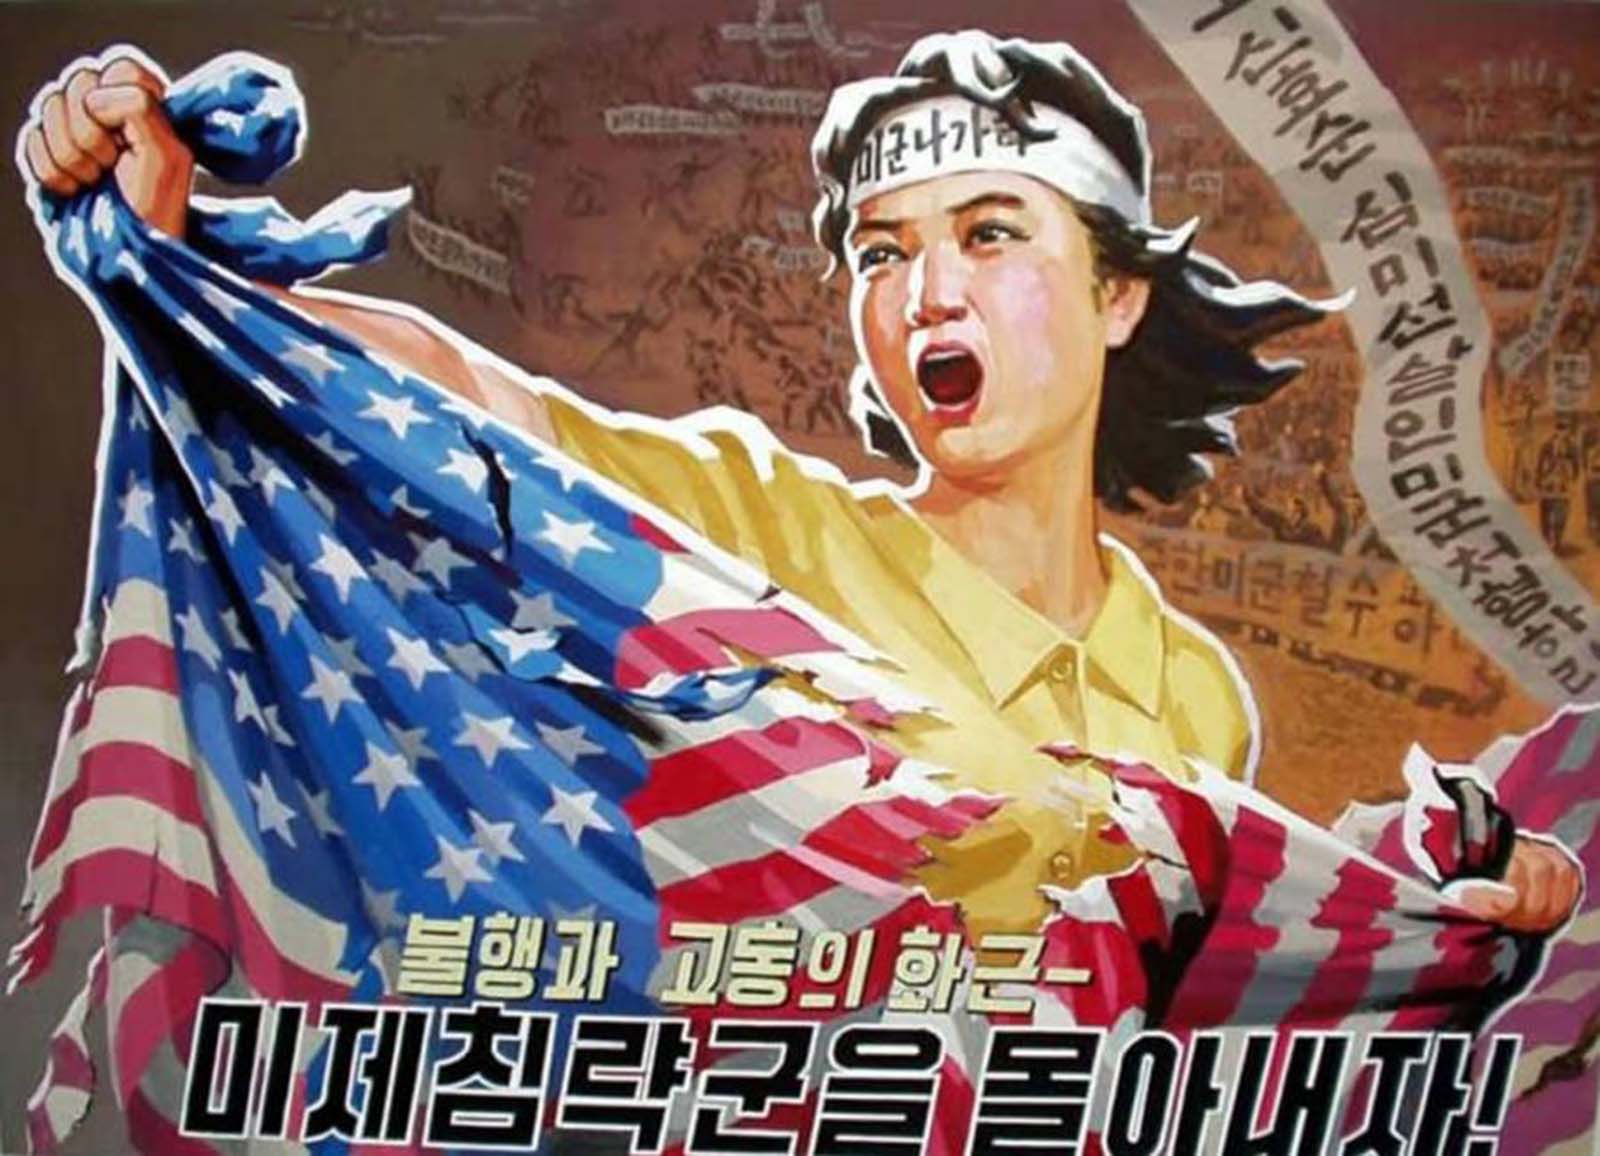 “Repel the American invader.” Headband: “US military out!”.